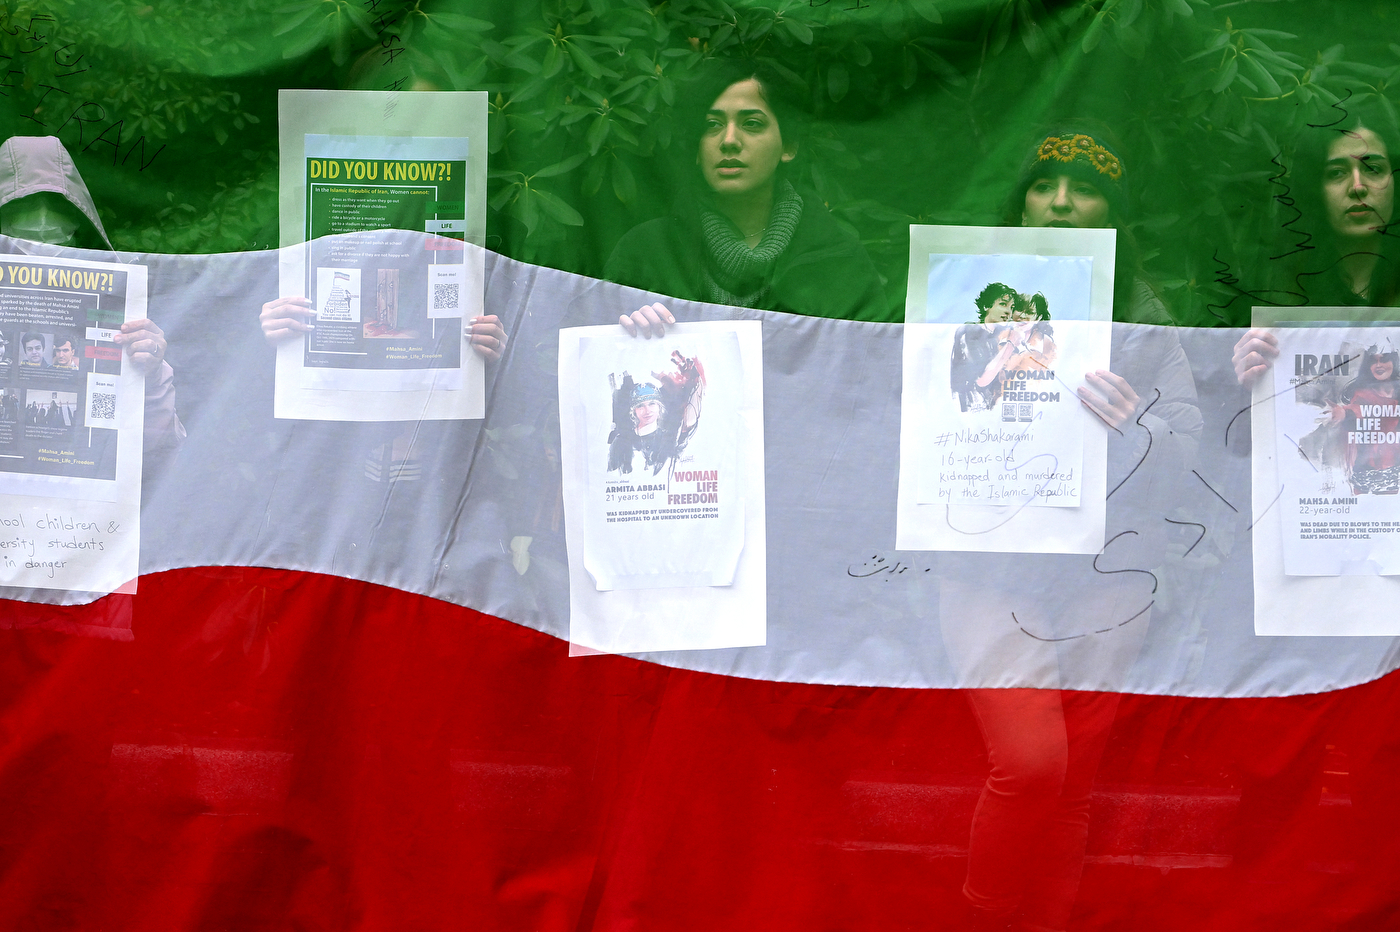 overlay of iranian flag over photo of students holding protest signs